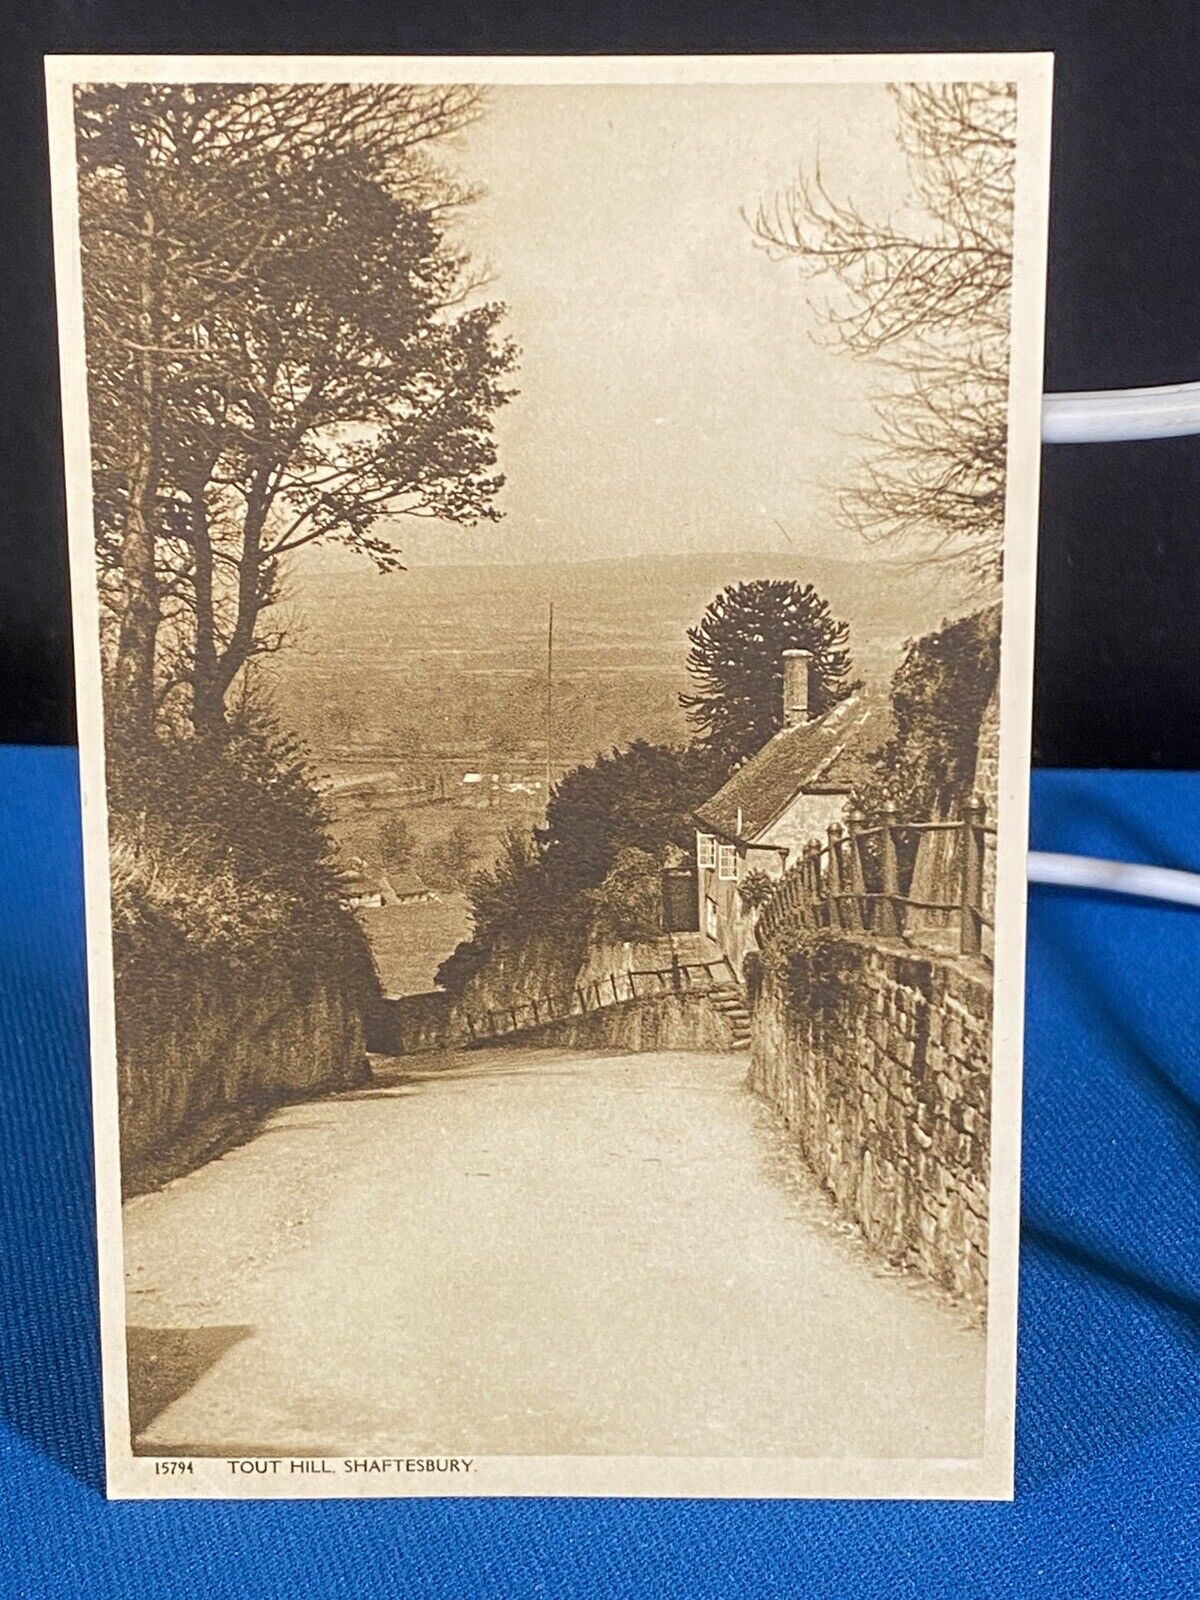 Shaftesbury England Tout Hill Vintage Postcard 1950s Unposted